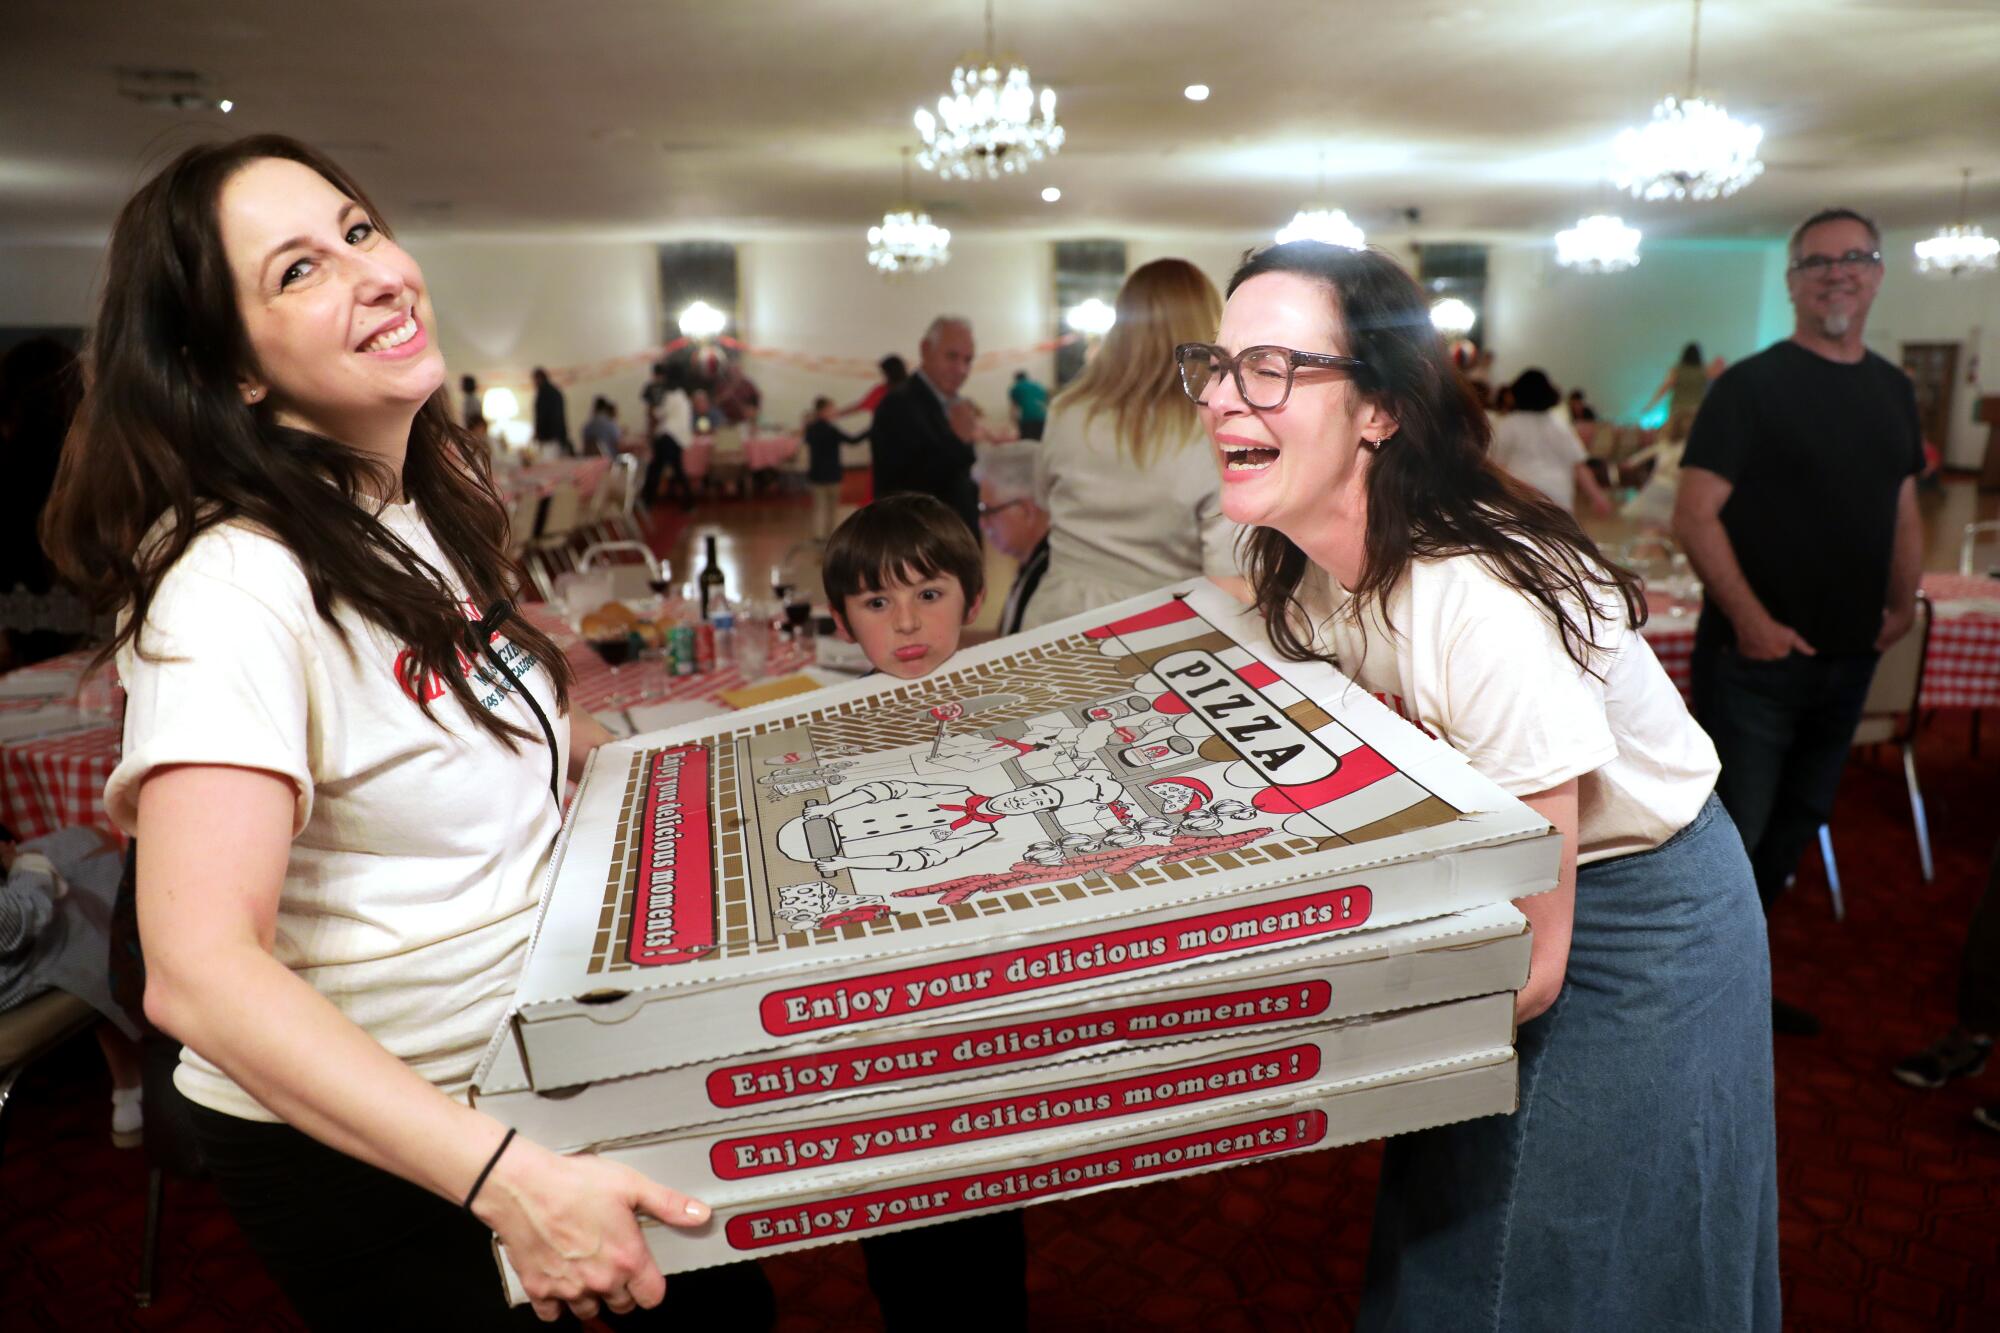 Two women carry large pizza boxes between them, laughing.